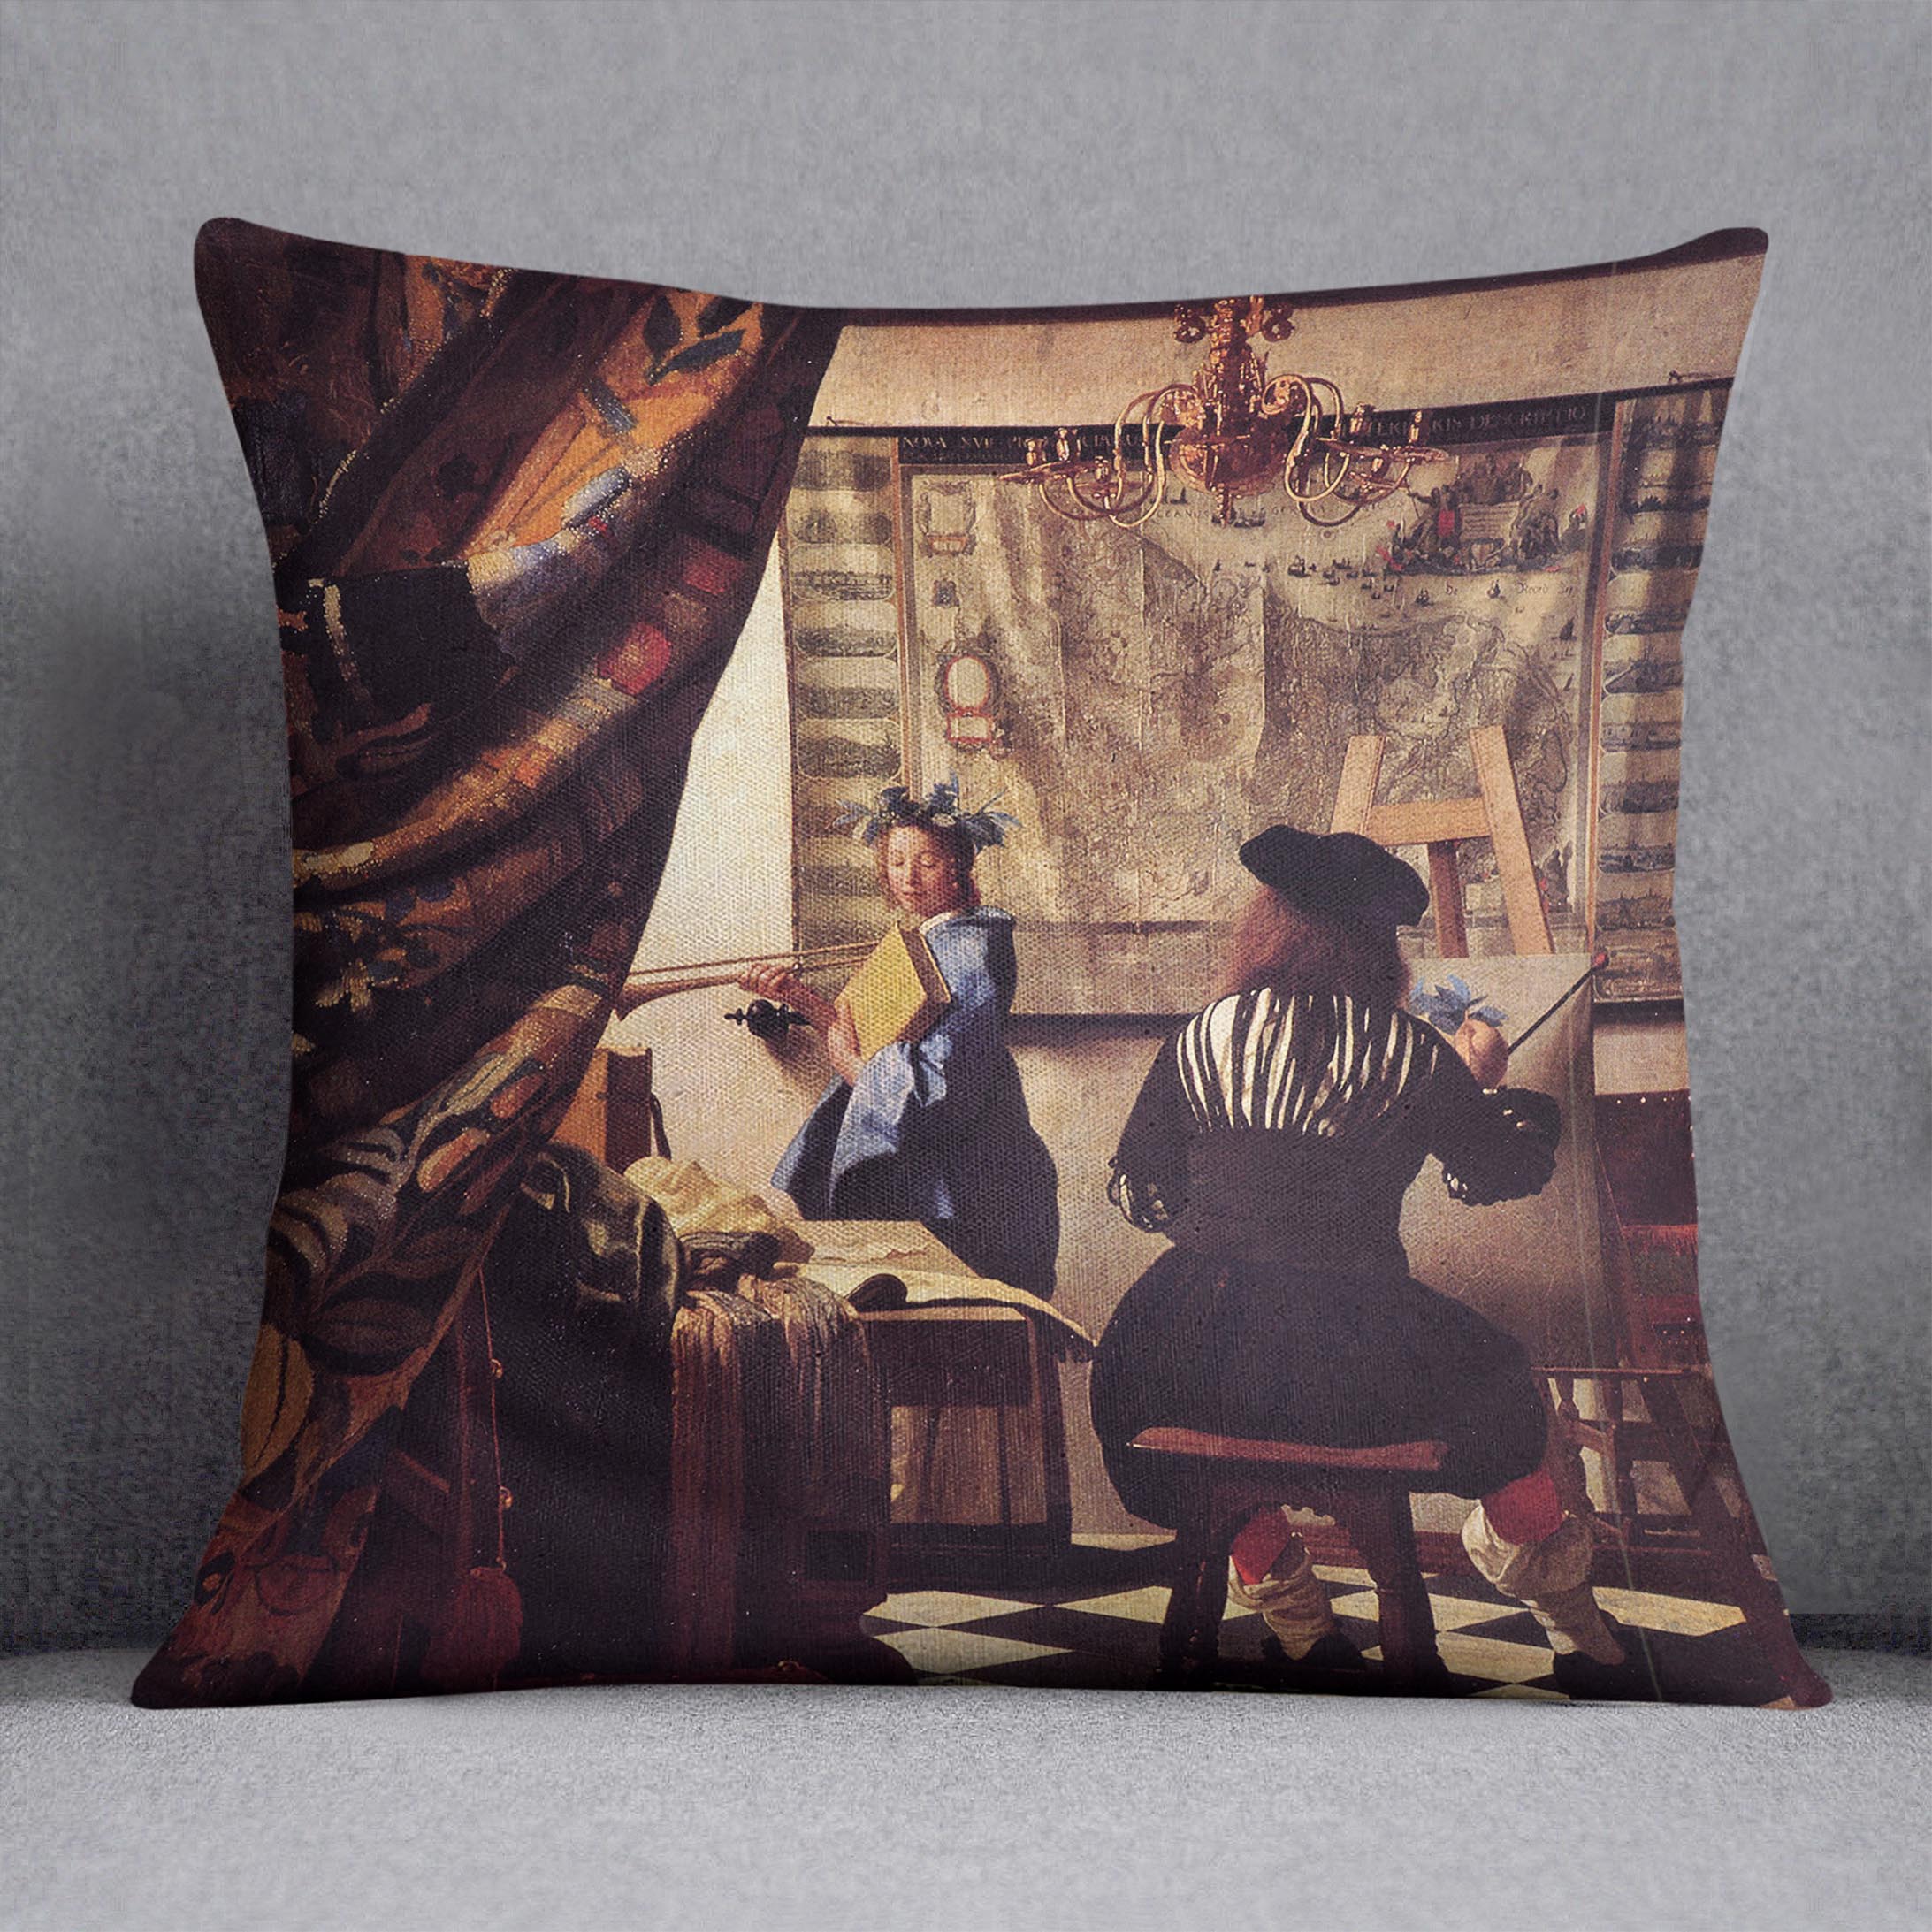 The Allegory of Painting by Vermeer Cushion